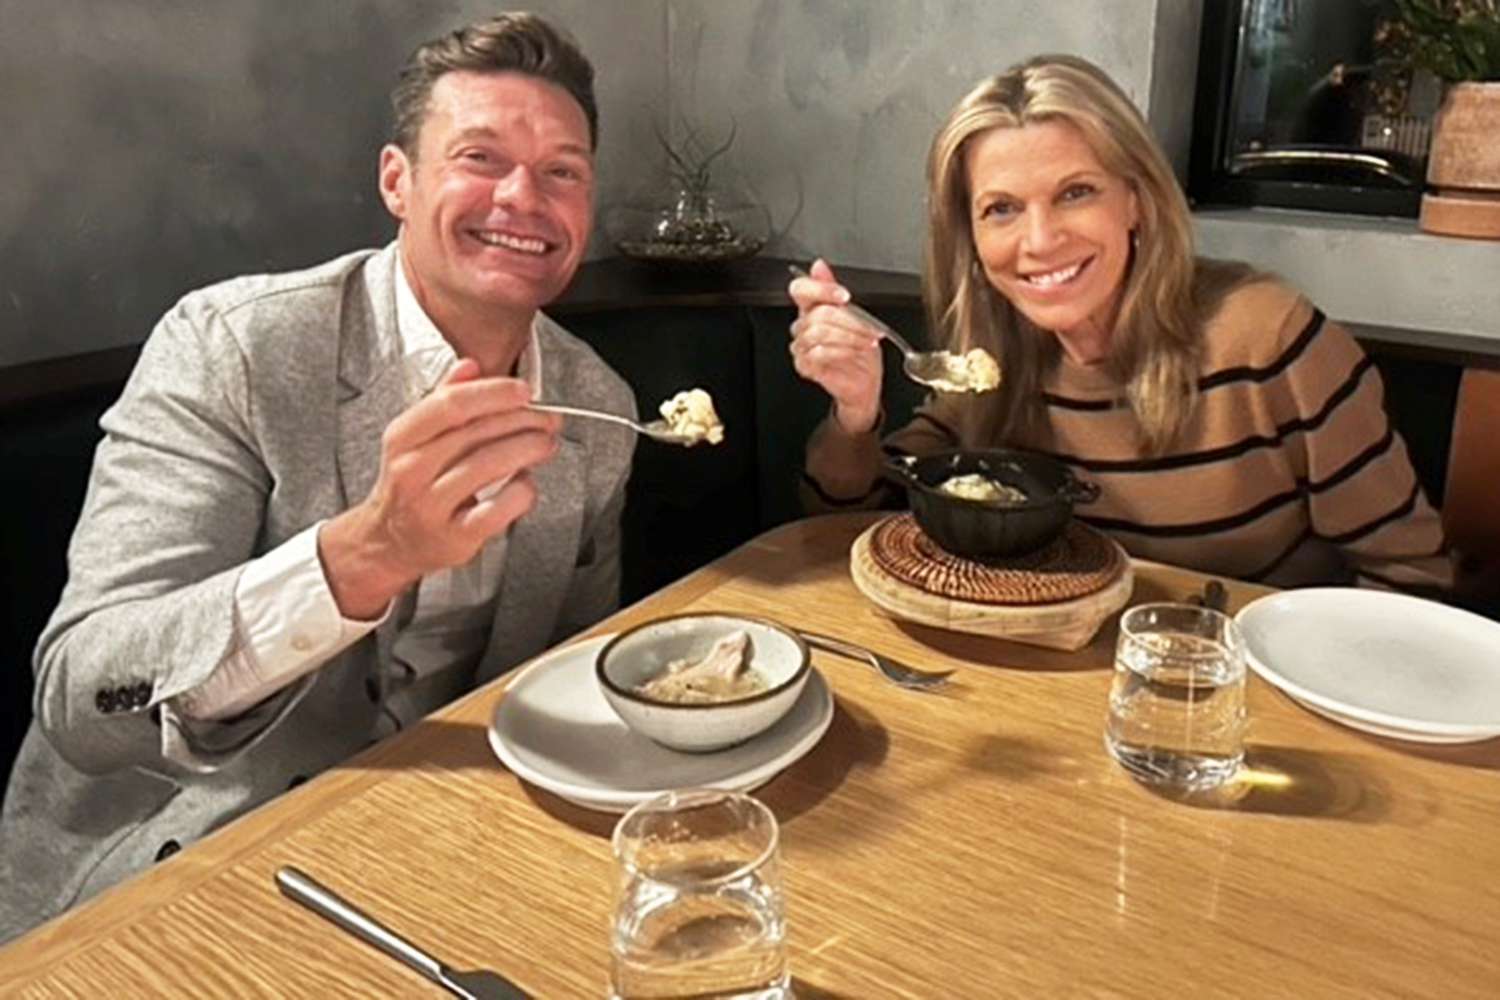 ...Shares Chummy Pic with New 'Wheel of Fortune' Co-Host Ryan Seacrest Ahead of His Debut: 'Friends On and Off ...